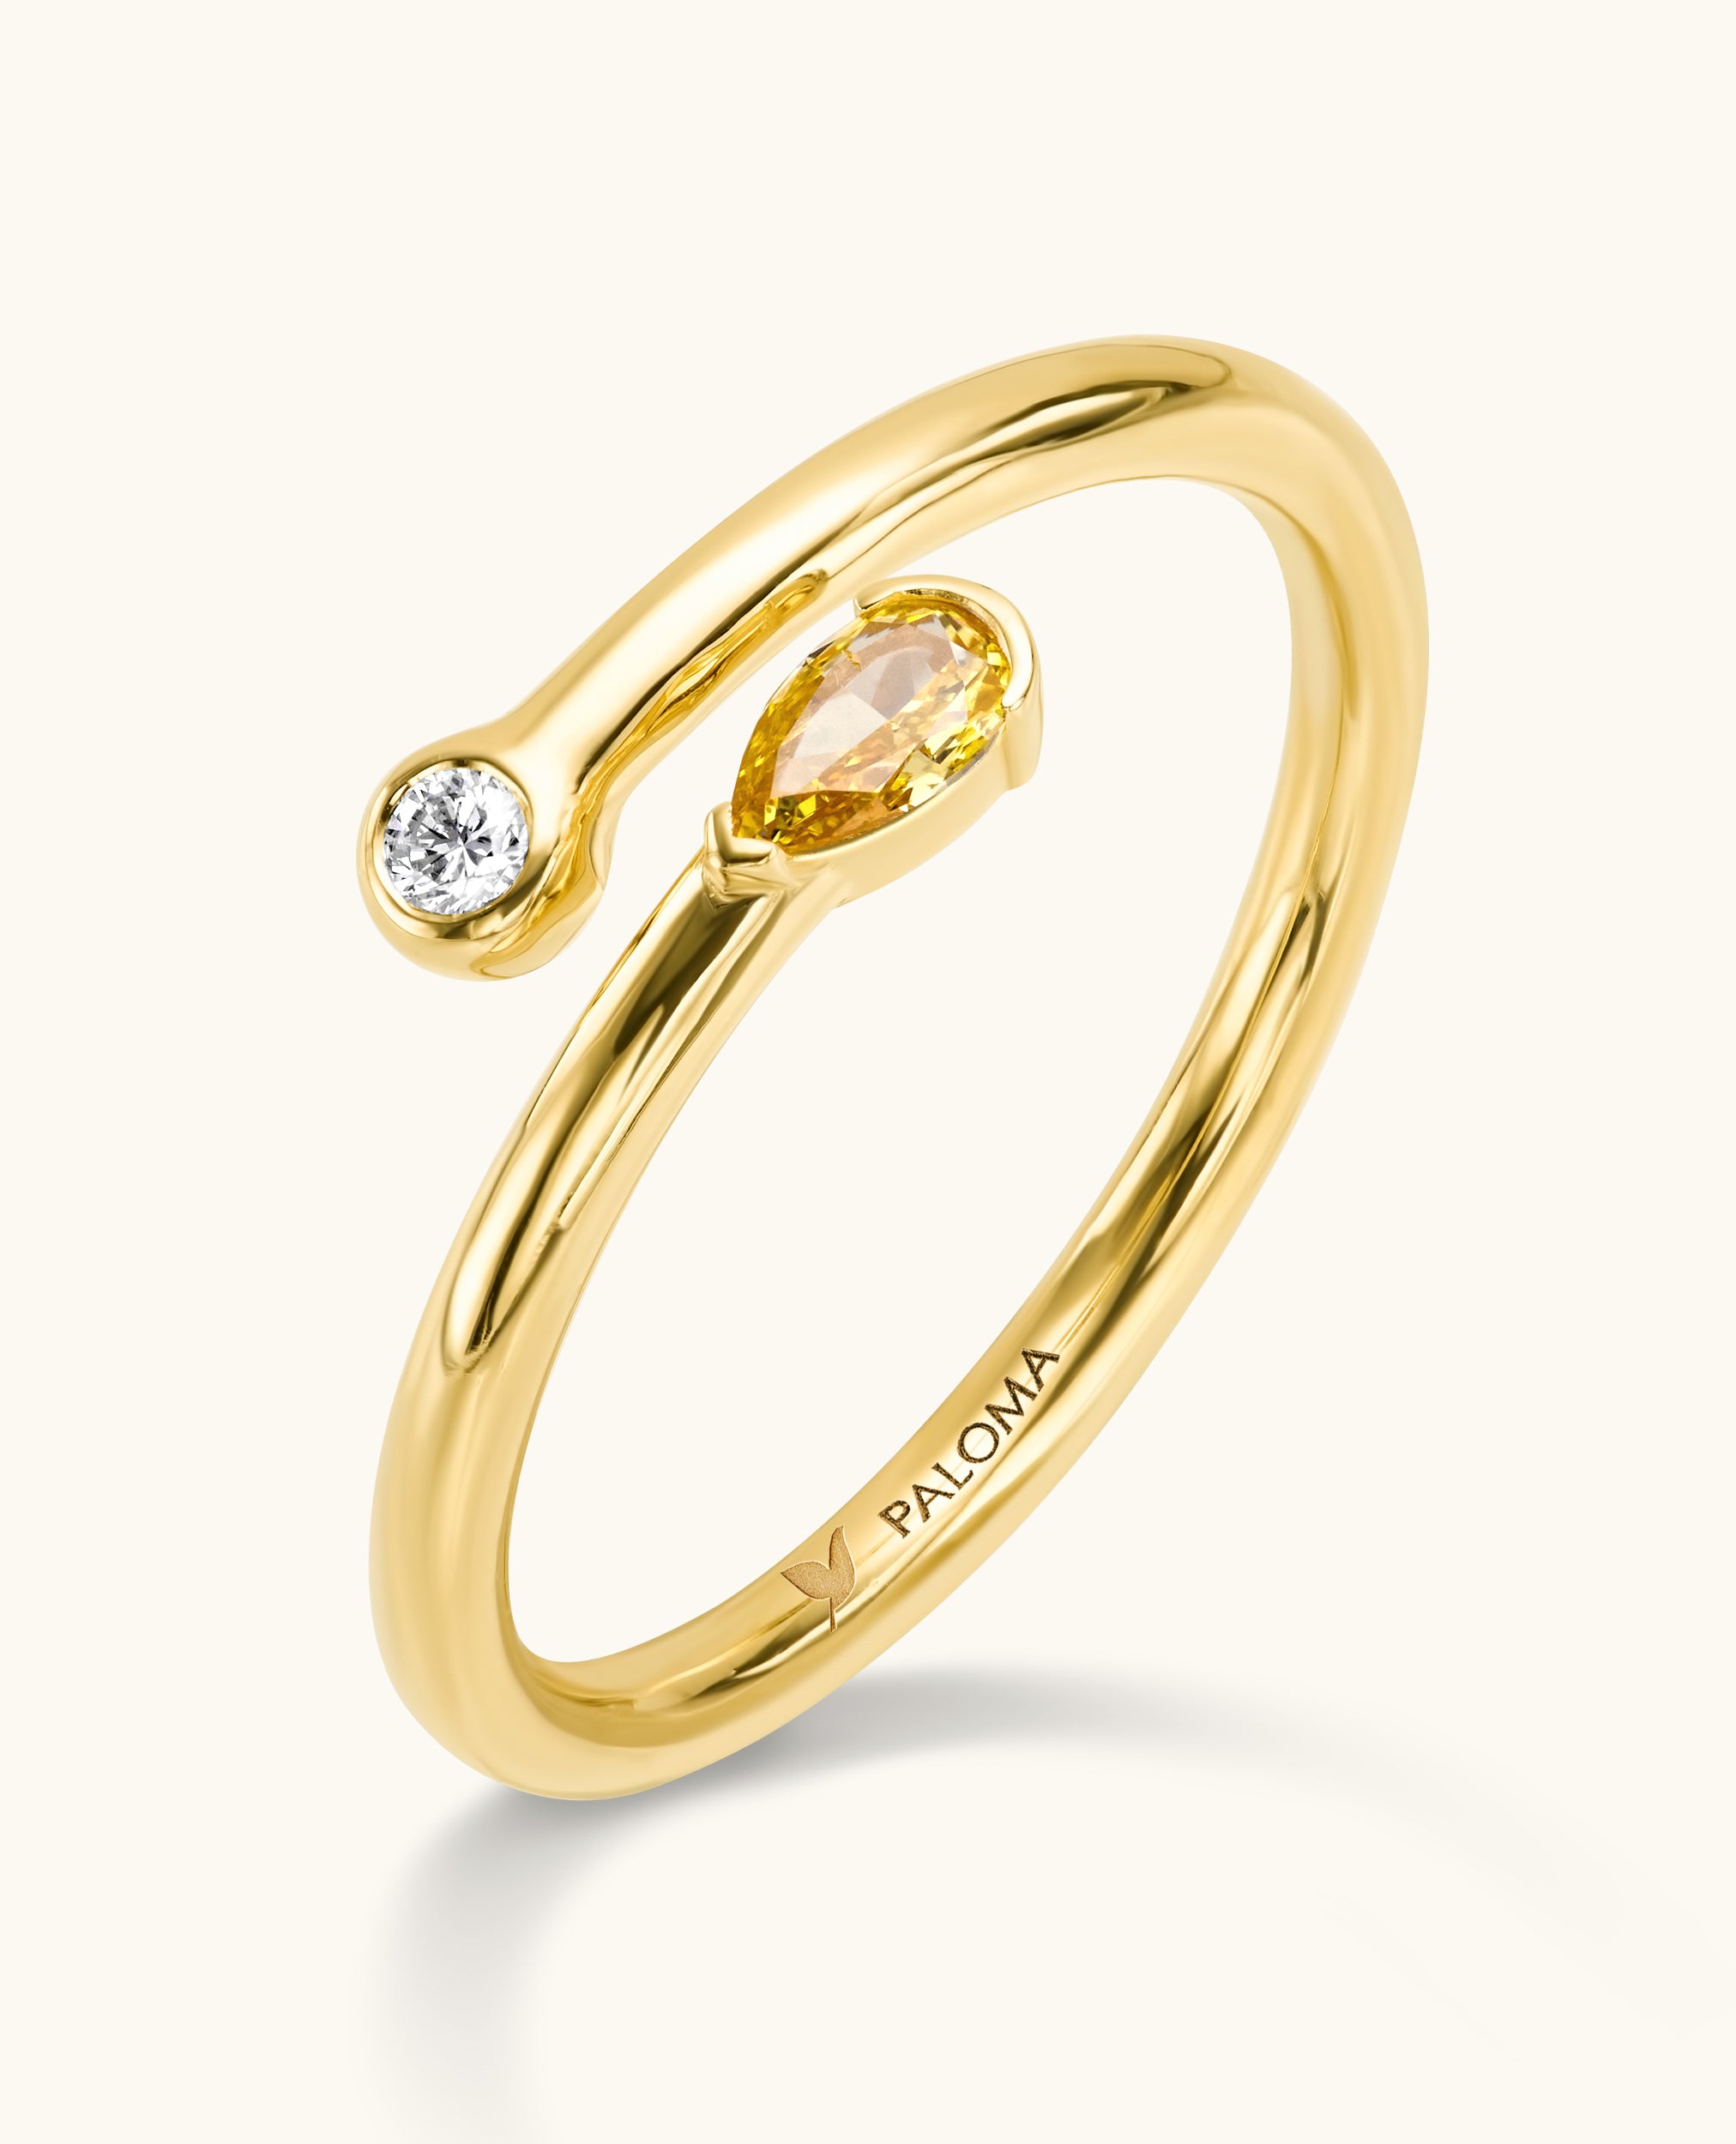 2-Toned Fancy Color Yellow and White Diamond Wrap Ring